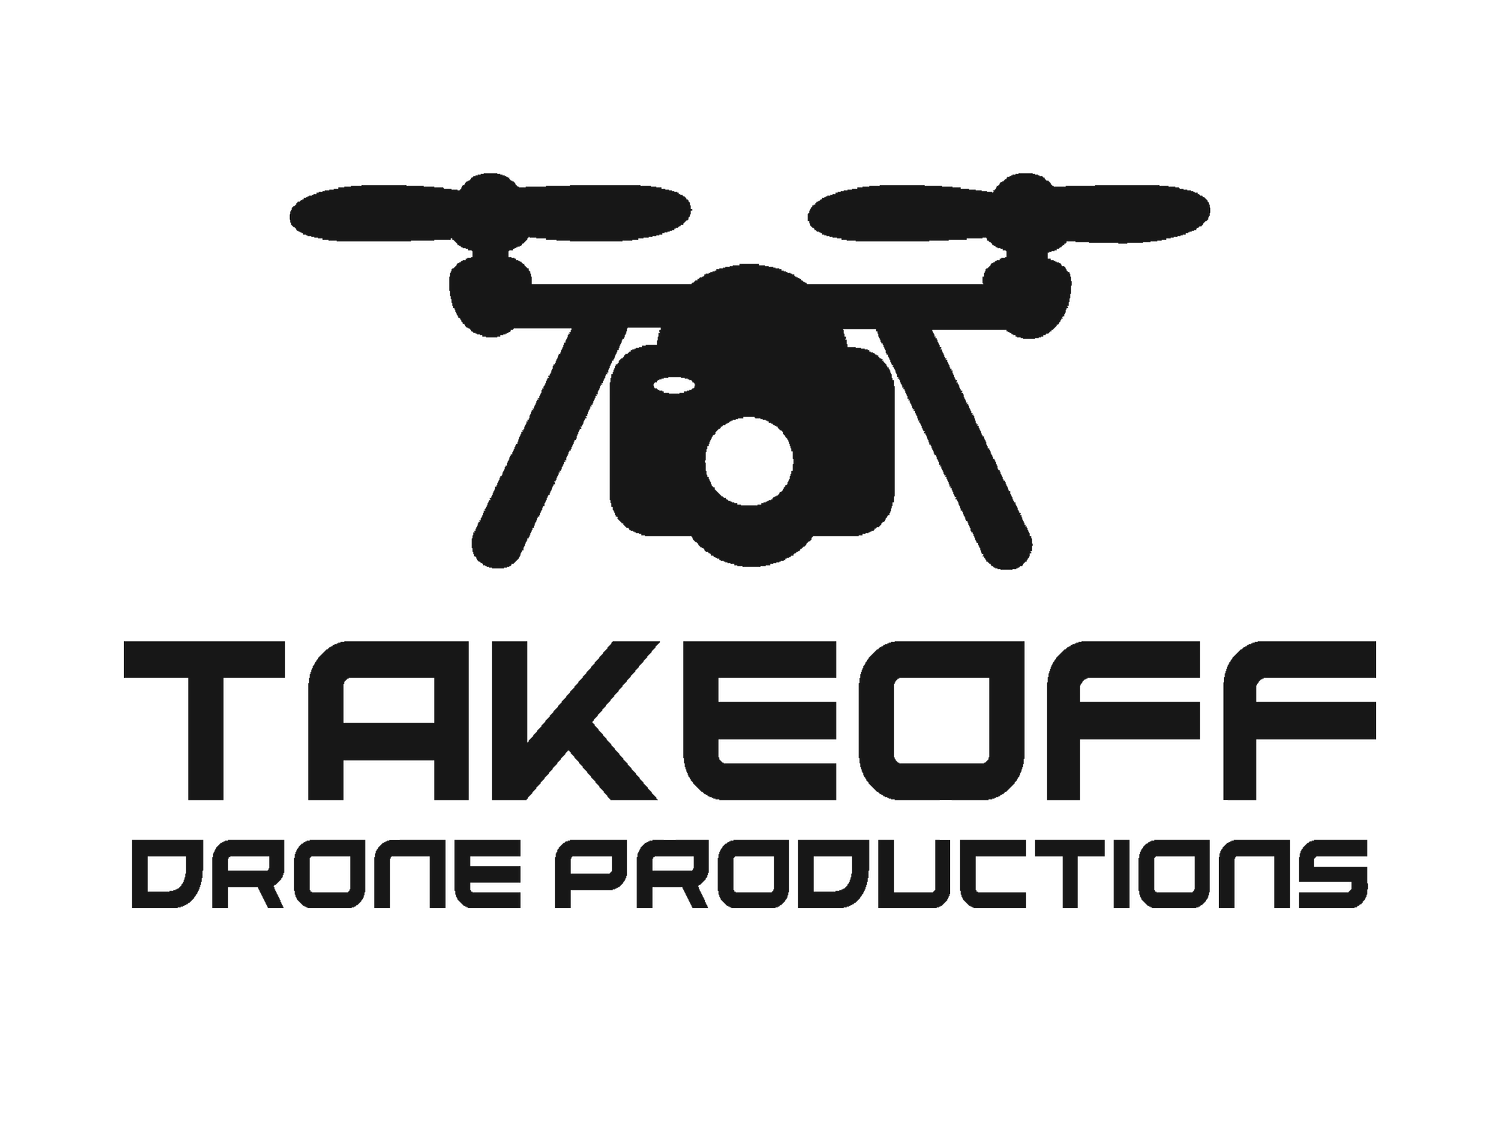 Takeoff Drone Productions